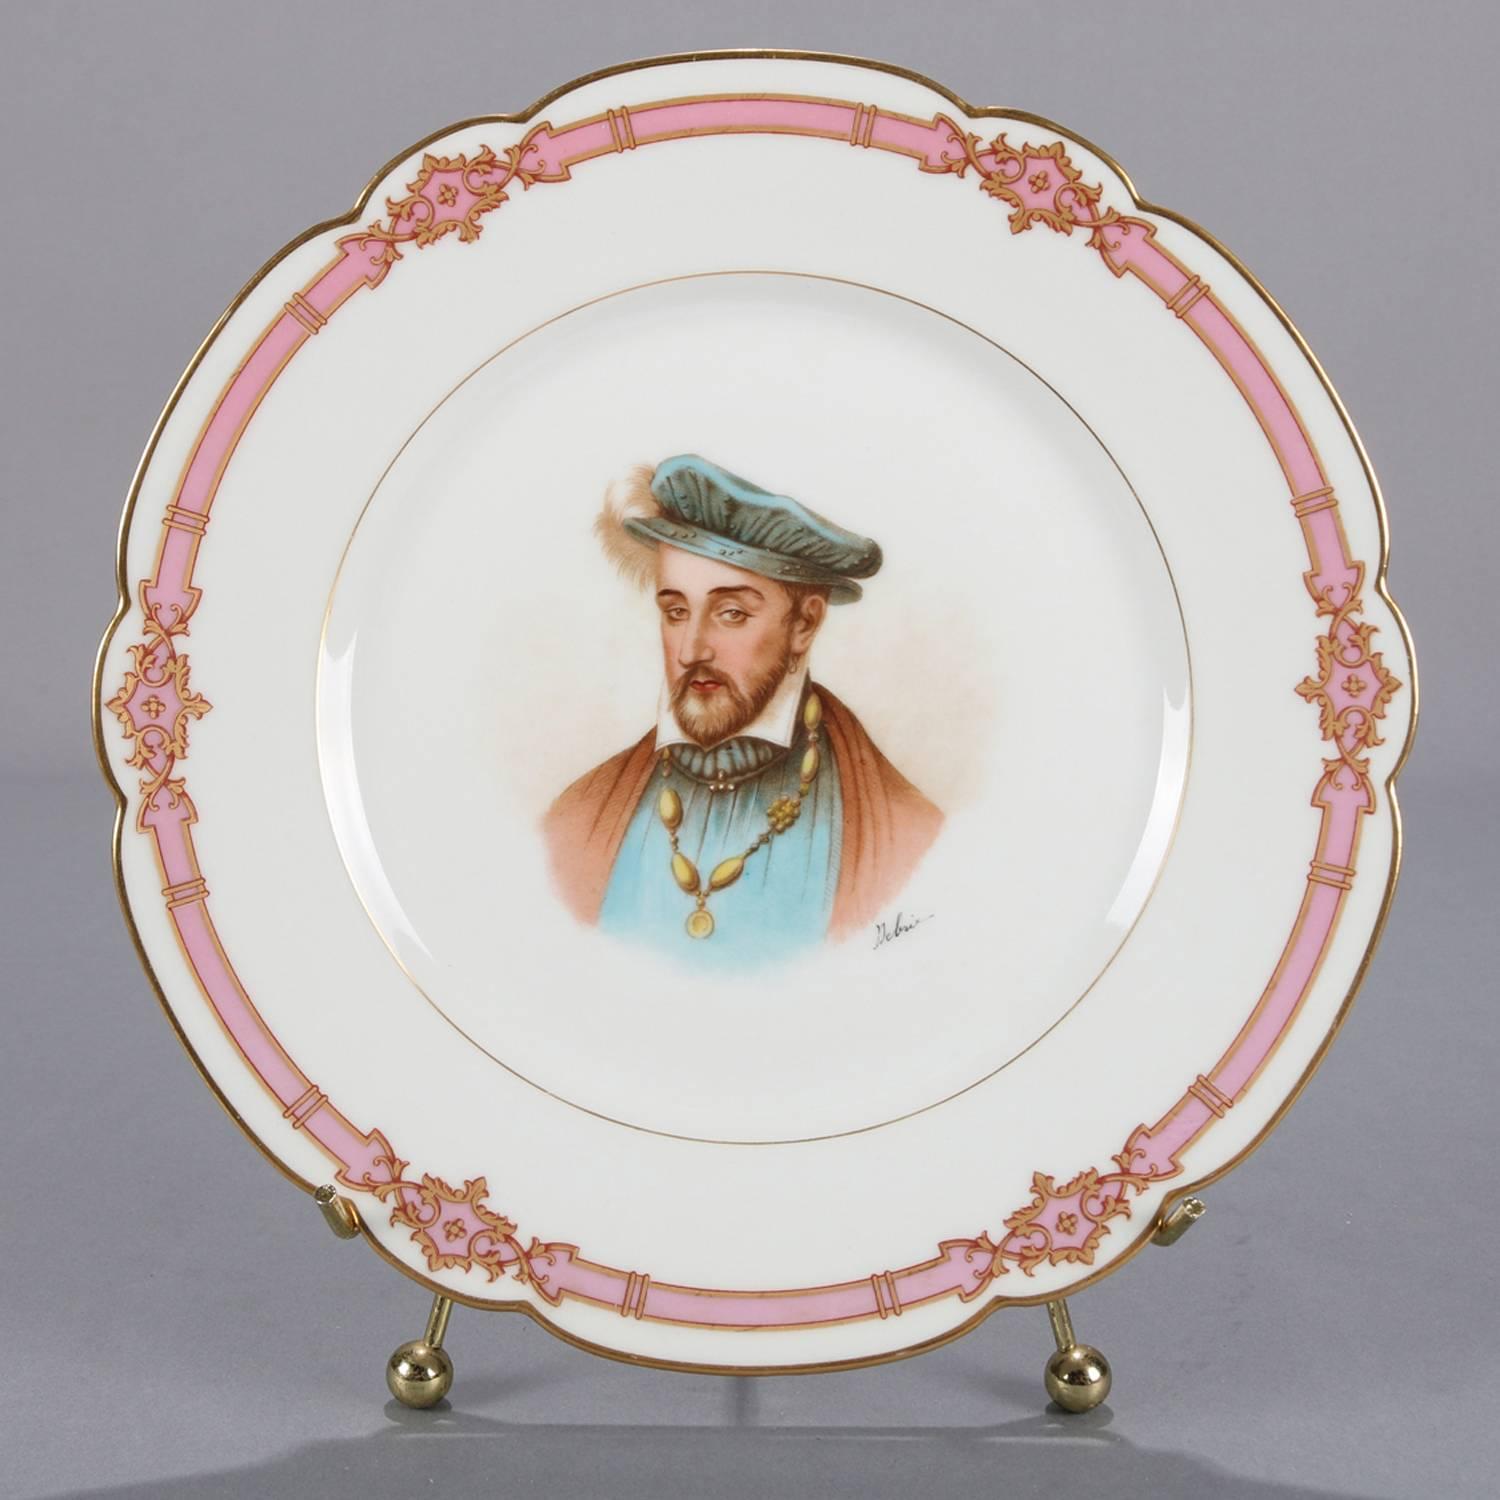 Antique French portrait plate by Sevres for Chateau de St Cloud features well with central artist signed portrait of Henri II Roy by Debrie and framed with gilt repeating and stylized fleur de lis pattern, rim with gilt scalloped edges and decorated